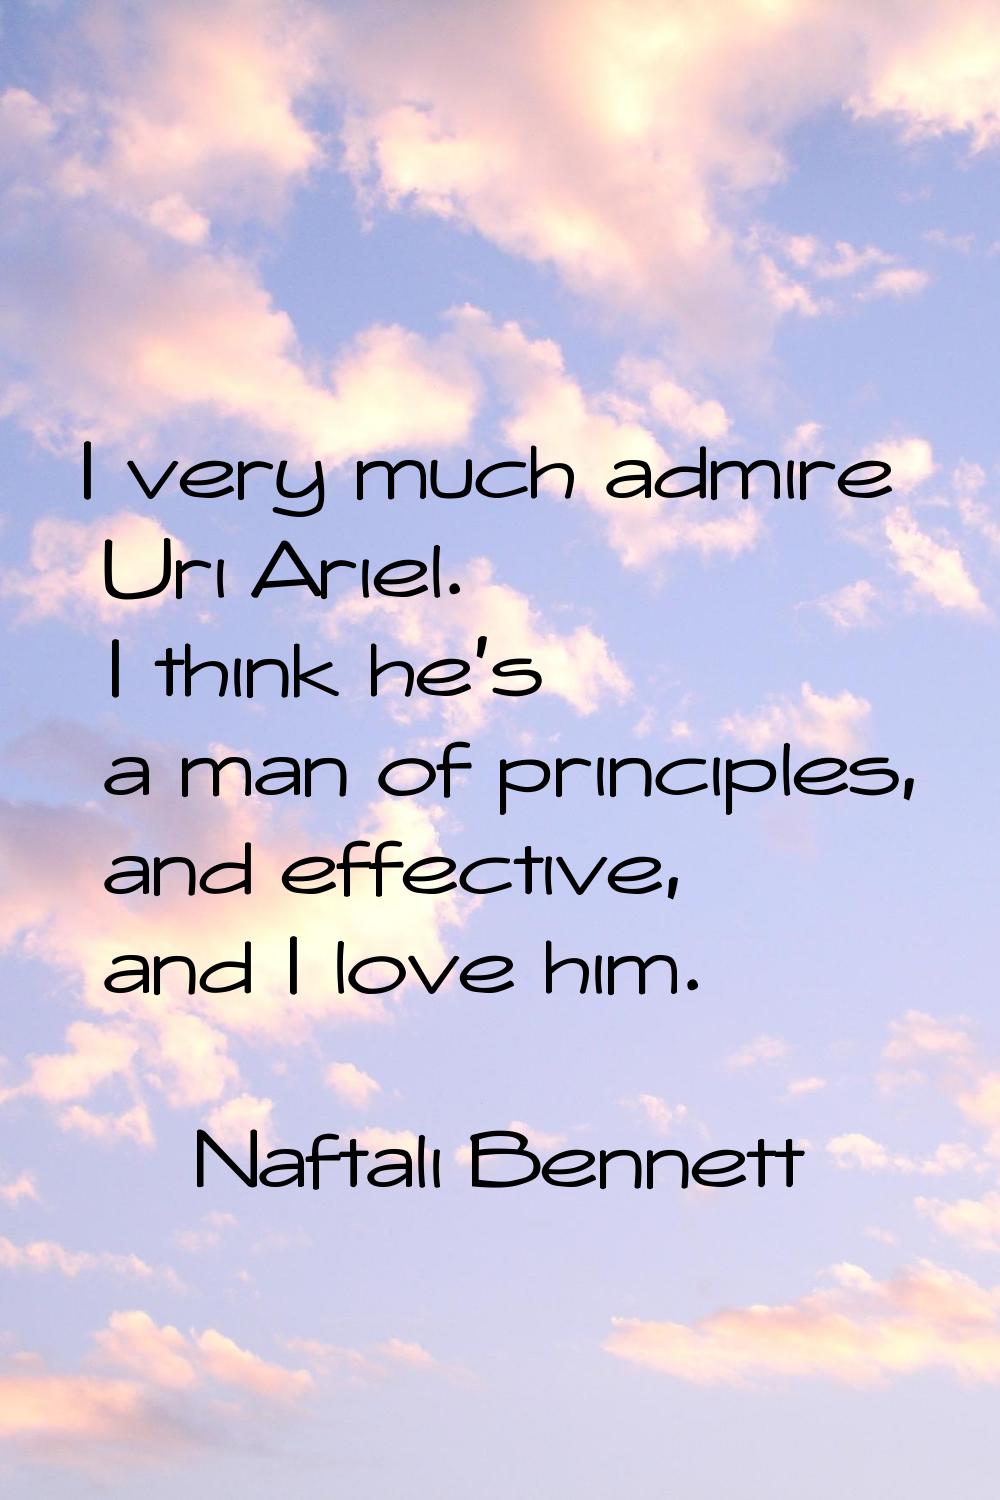 I very much admire Uri Ariel. I think he's a man of principles, and effective, and I love him.